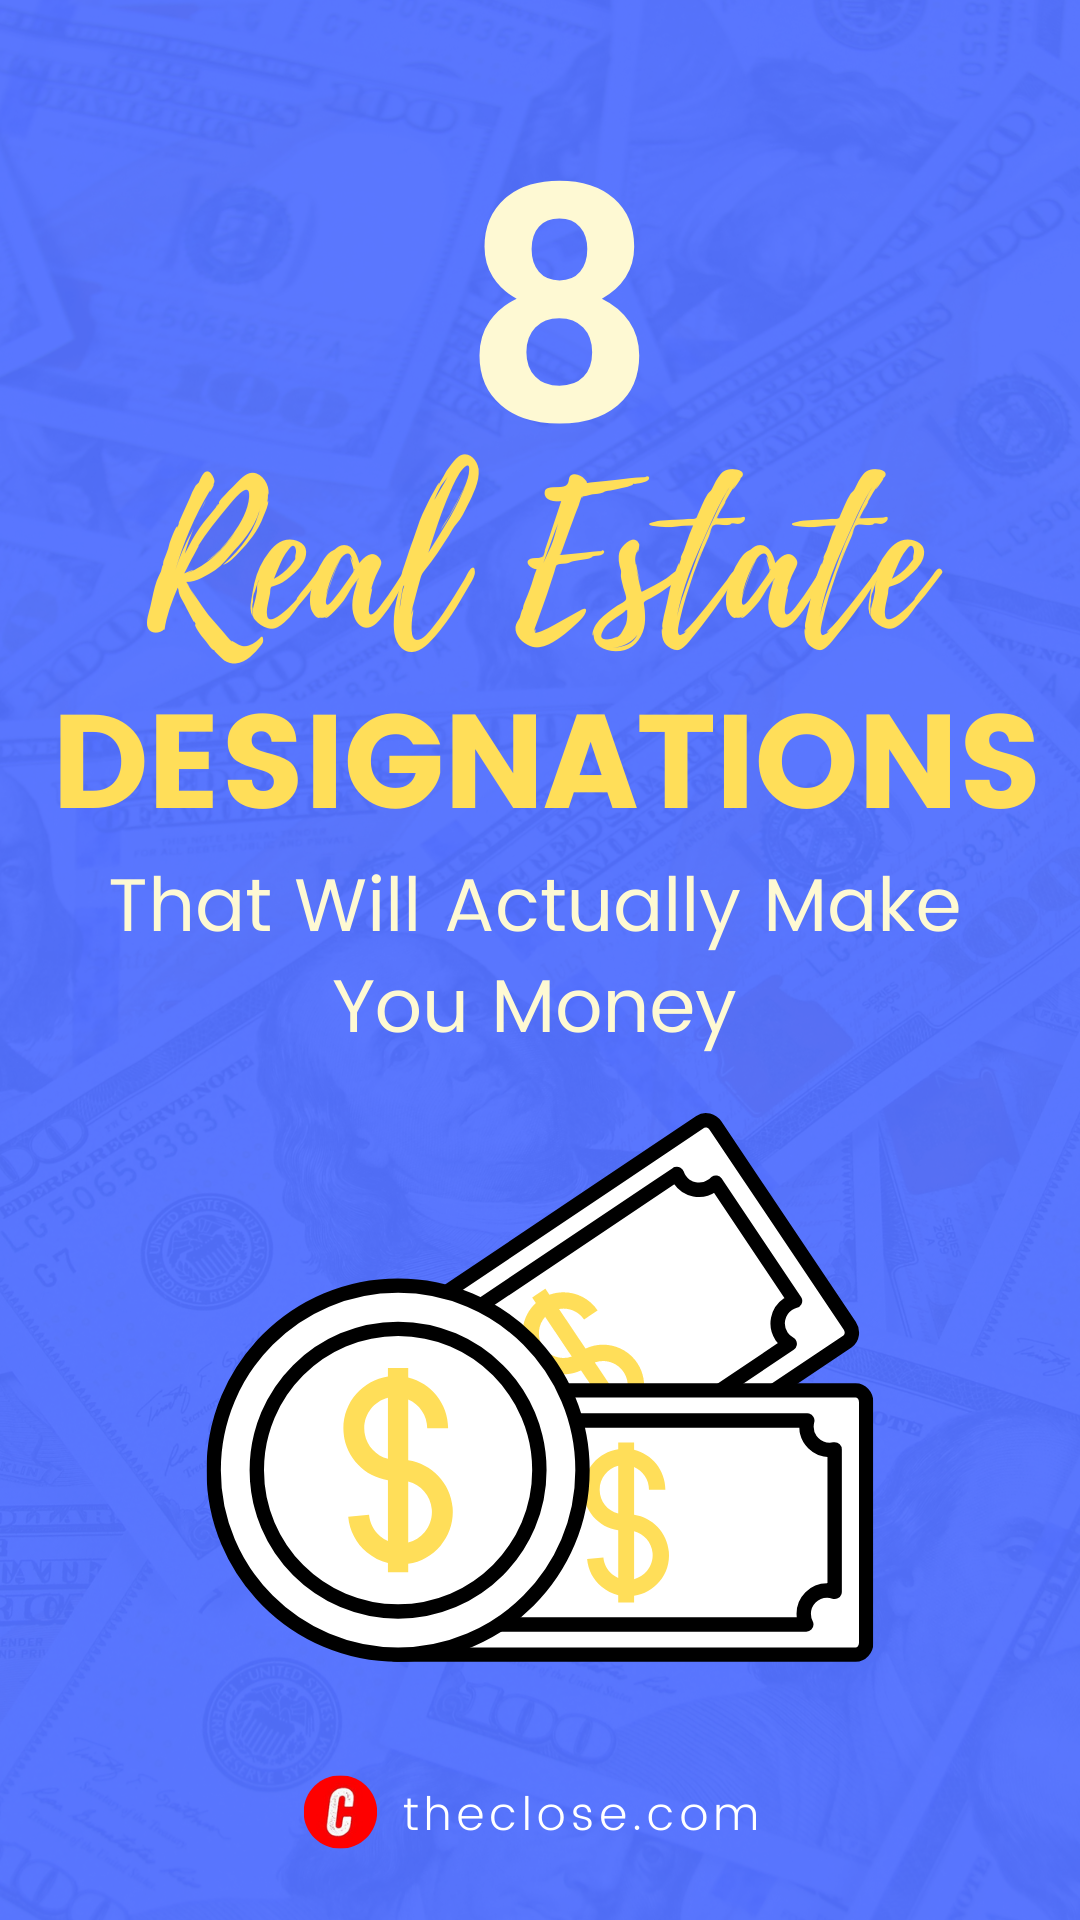 How to find a gaa real estate designations